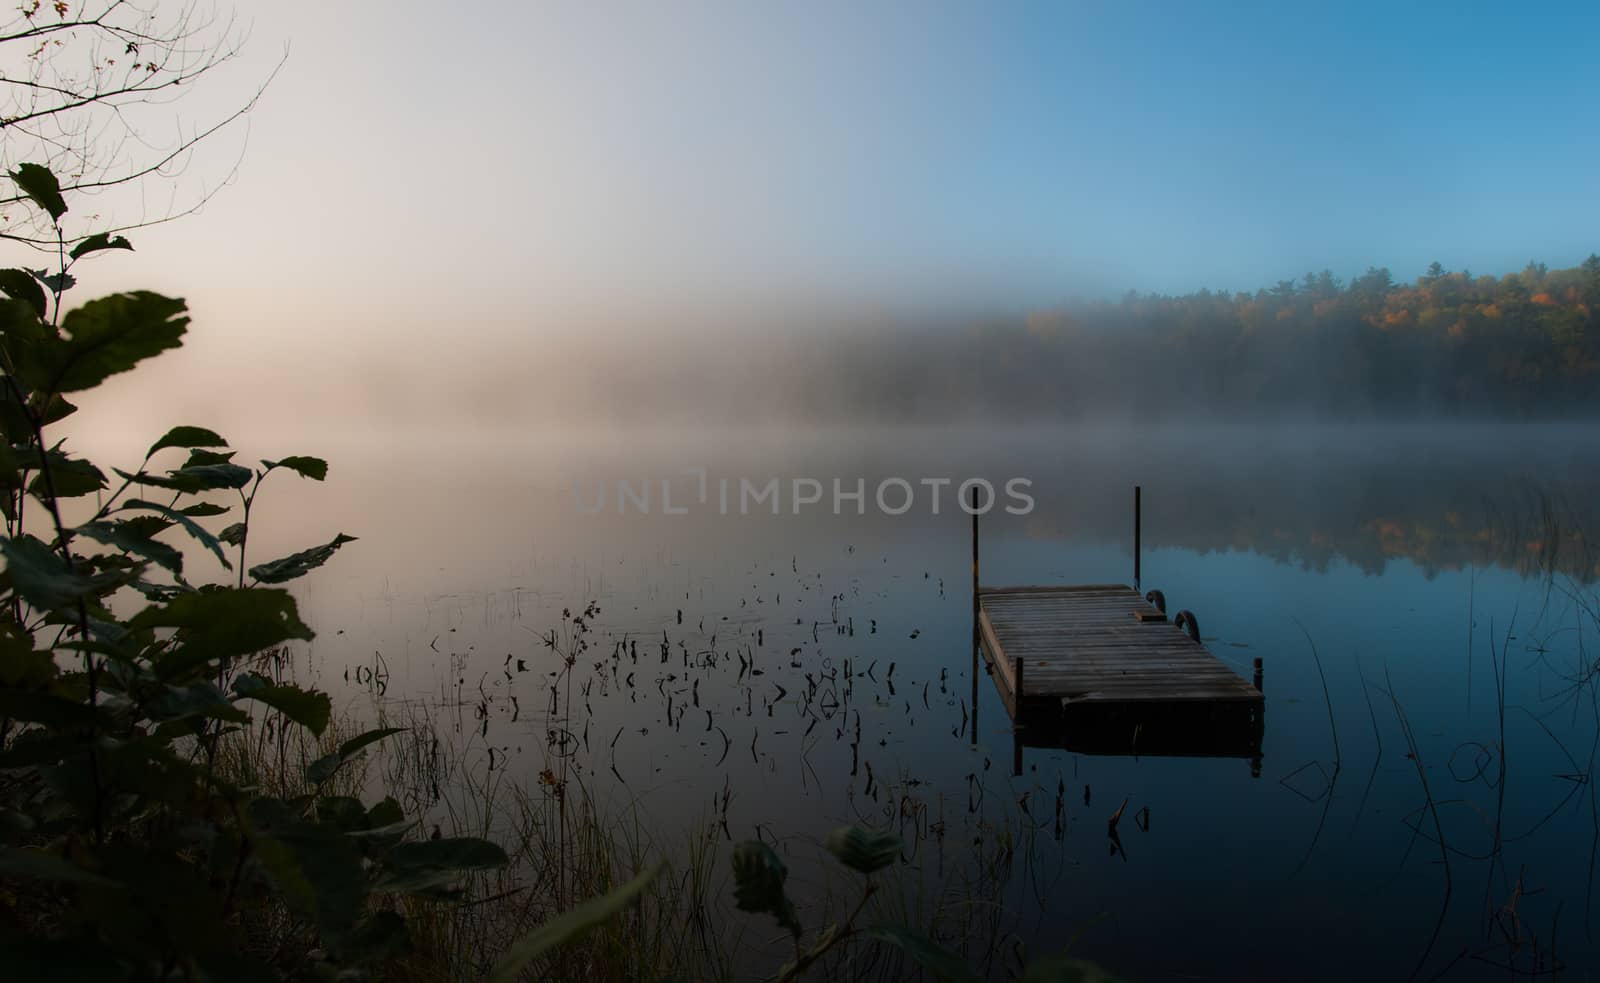 Early morning sunrise burns off the fog which has lingered over the lake.